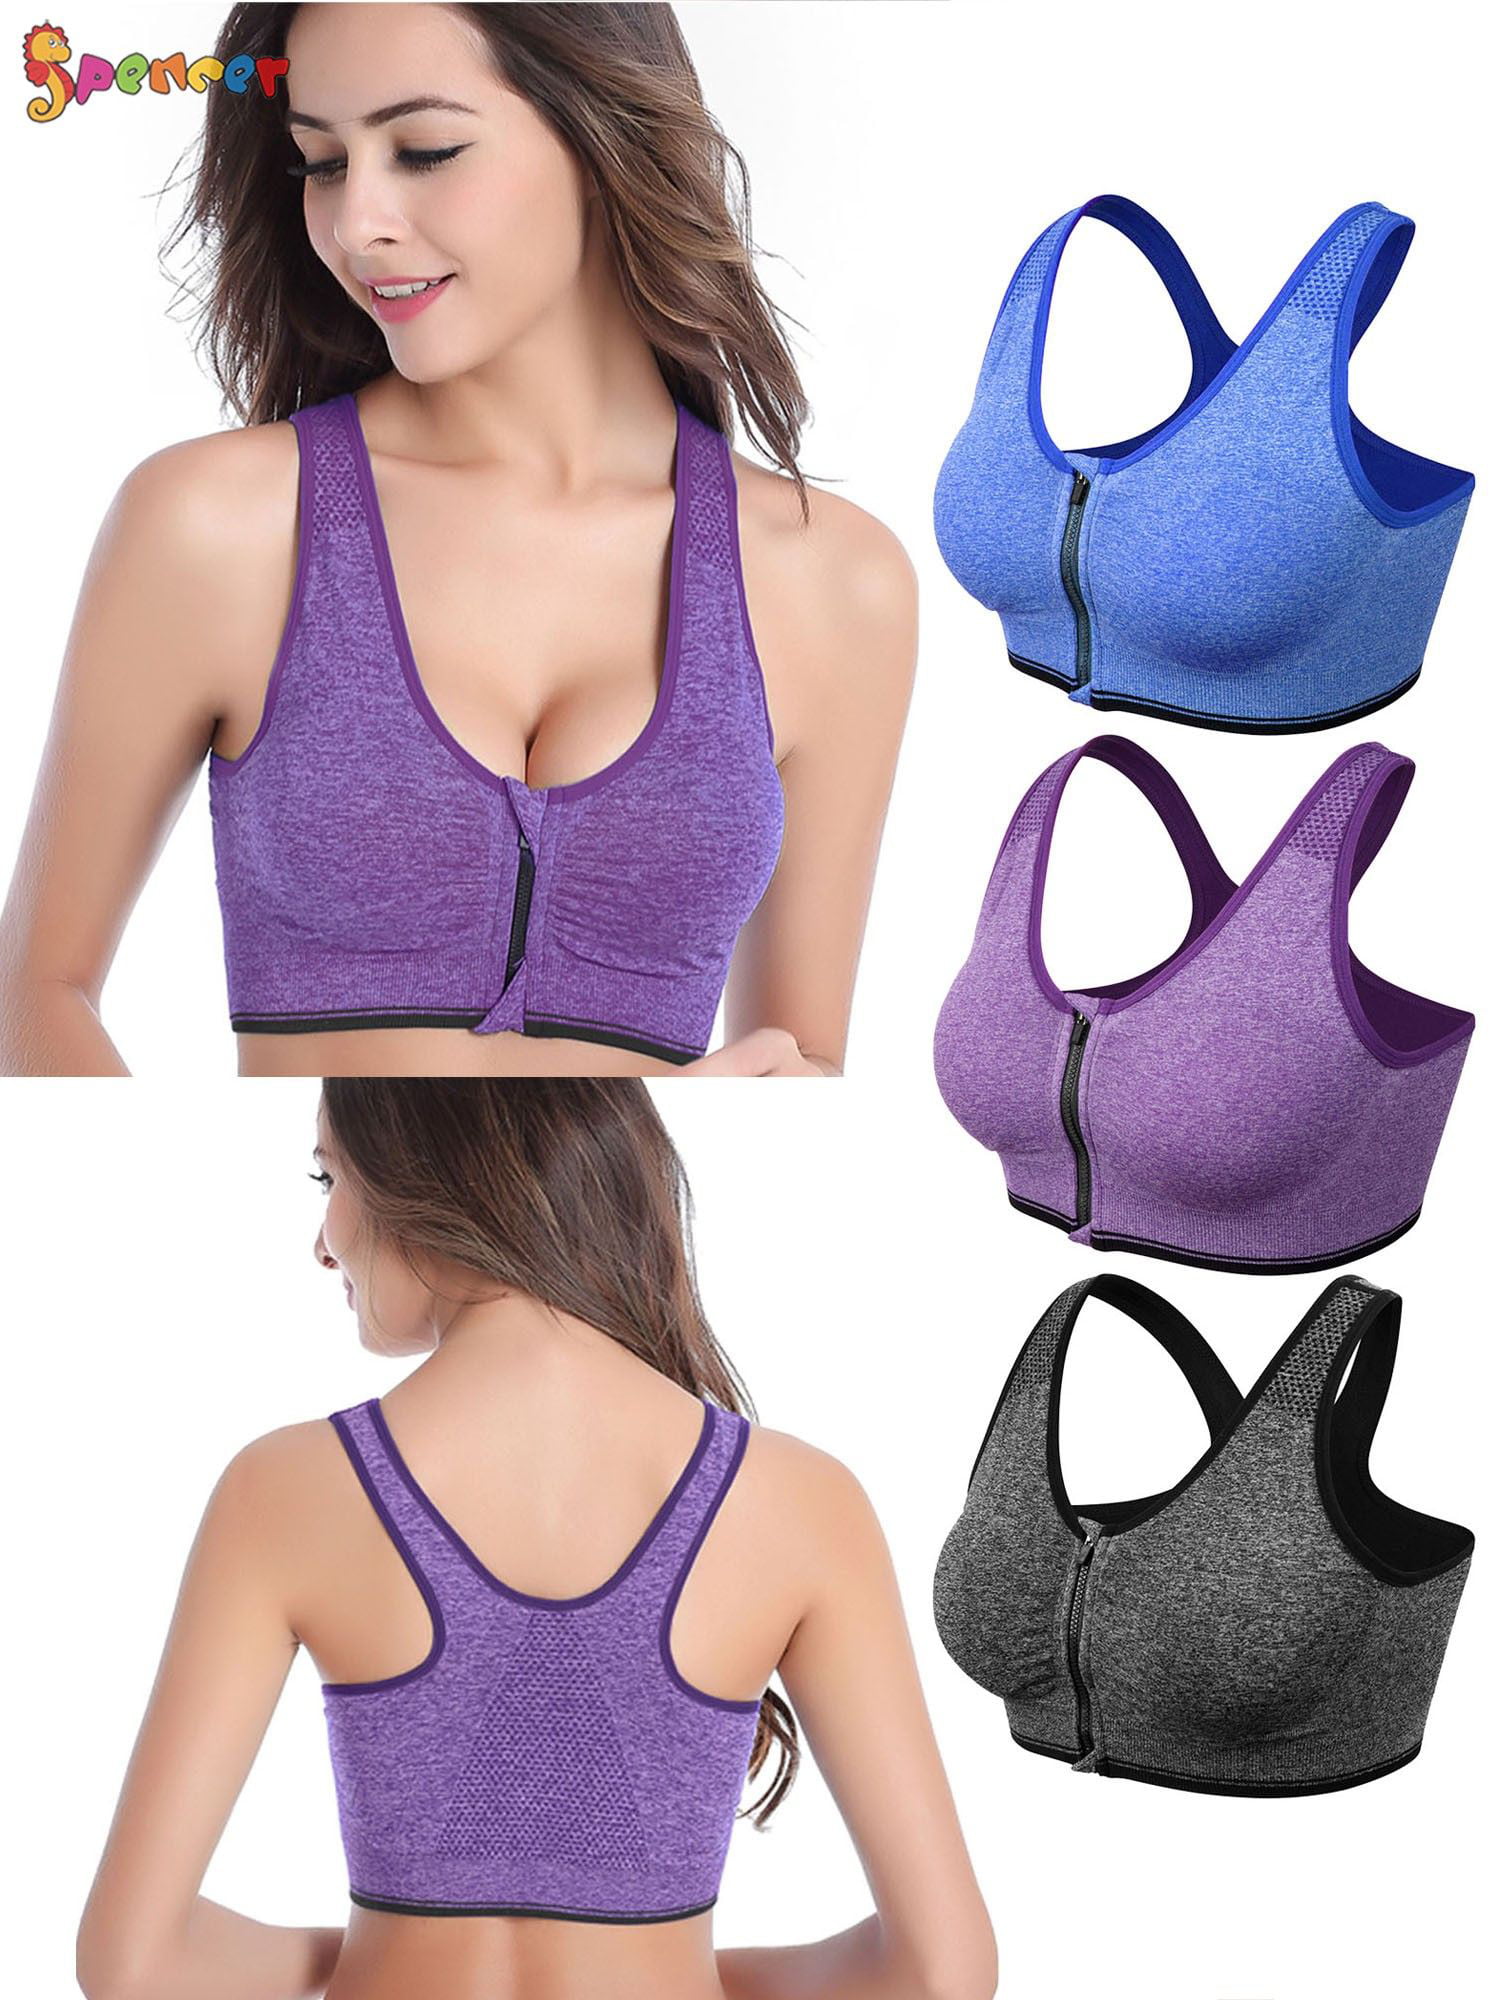 ROUGHRIVER Women's Yoga Bra with Removable Pads Racer T-Back Sports Top 2pack 3 